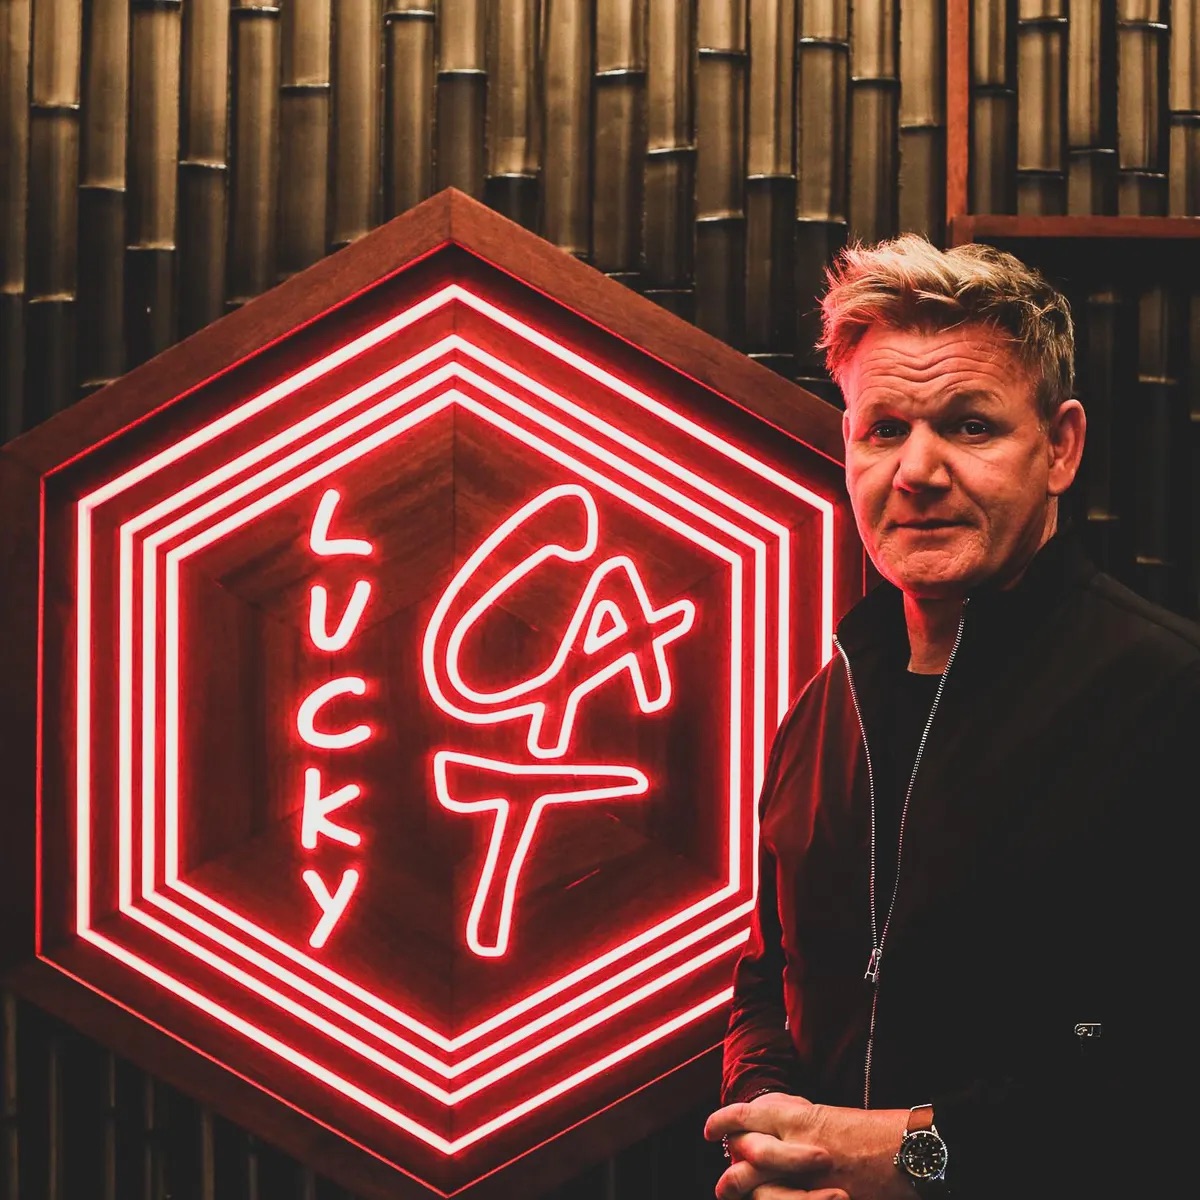 NEW OPENING: Gordon Ramsay’s Lucky Cat is set to arrive in Manchester next month, opening its doors on King Street from Thursday 1st June, spanning three floors, inspired by 1930s Tokyo kissas and drinking dens.

https://t.co/JApXwSBc69 https://t.co/qbb0i5UY91